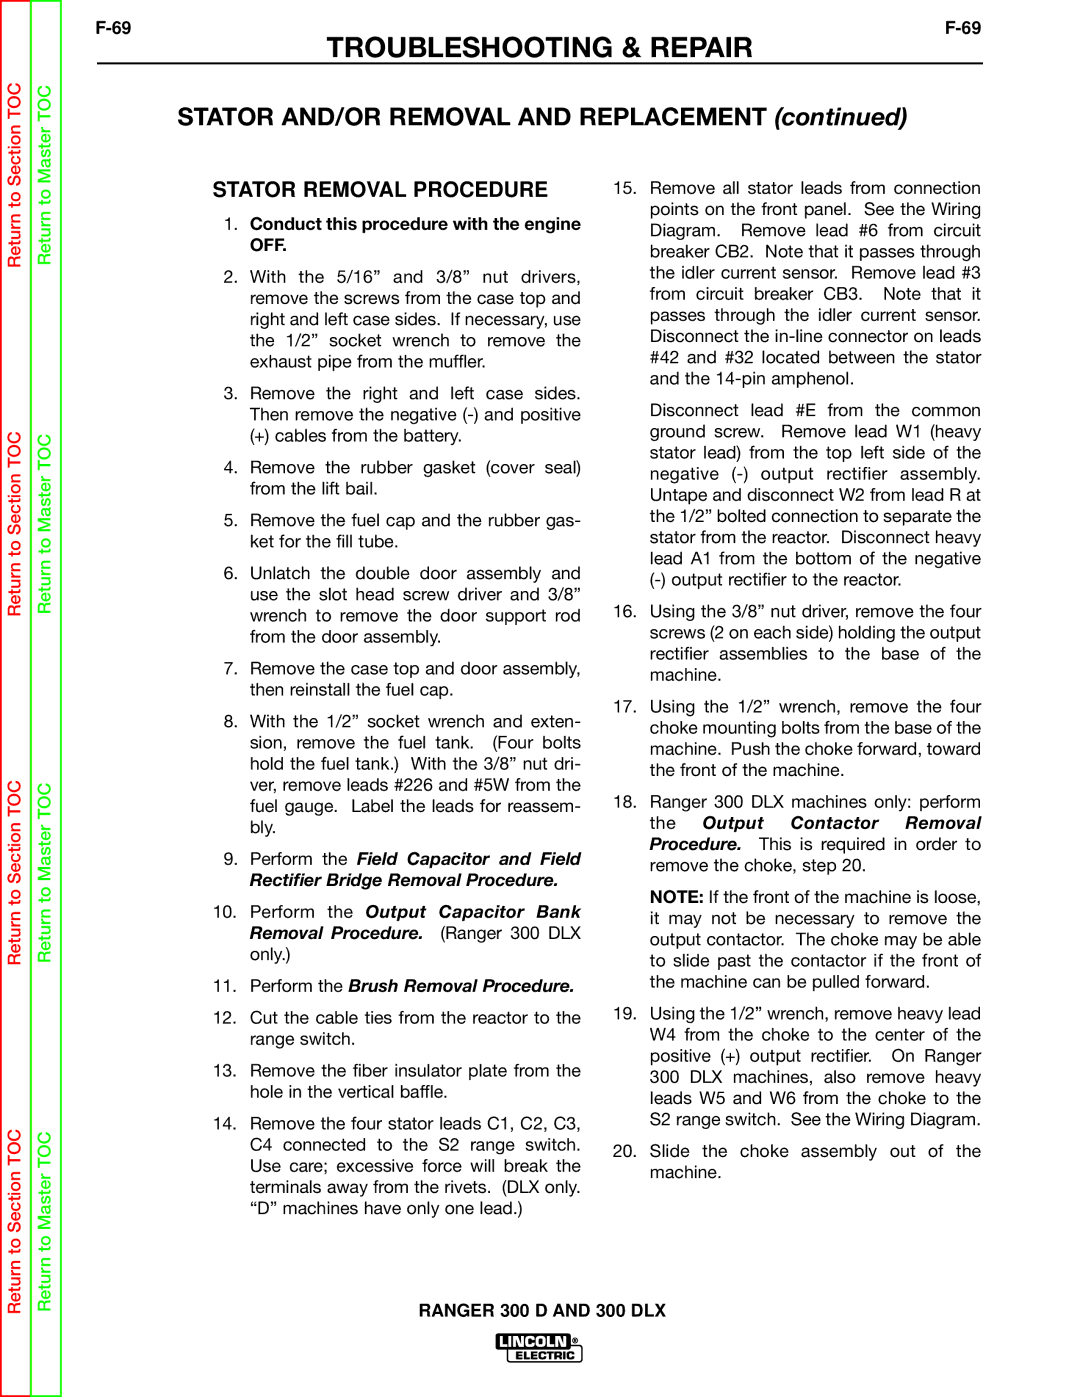 Lincoln Electric SVM148-B service manual Stator Removal Procedure, Conduct this procedure with the engine OFF 